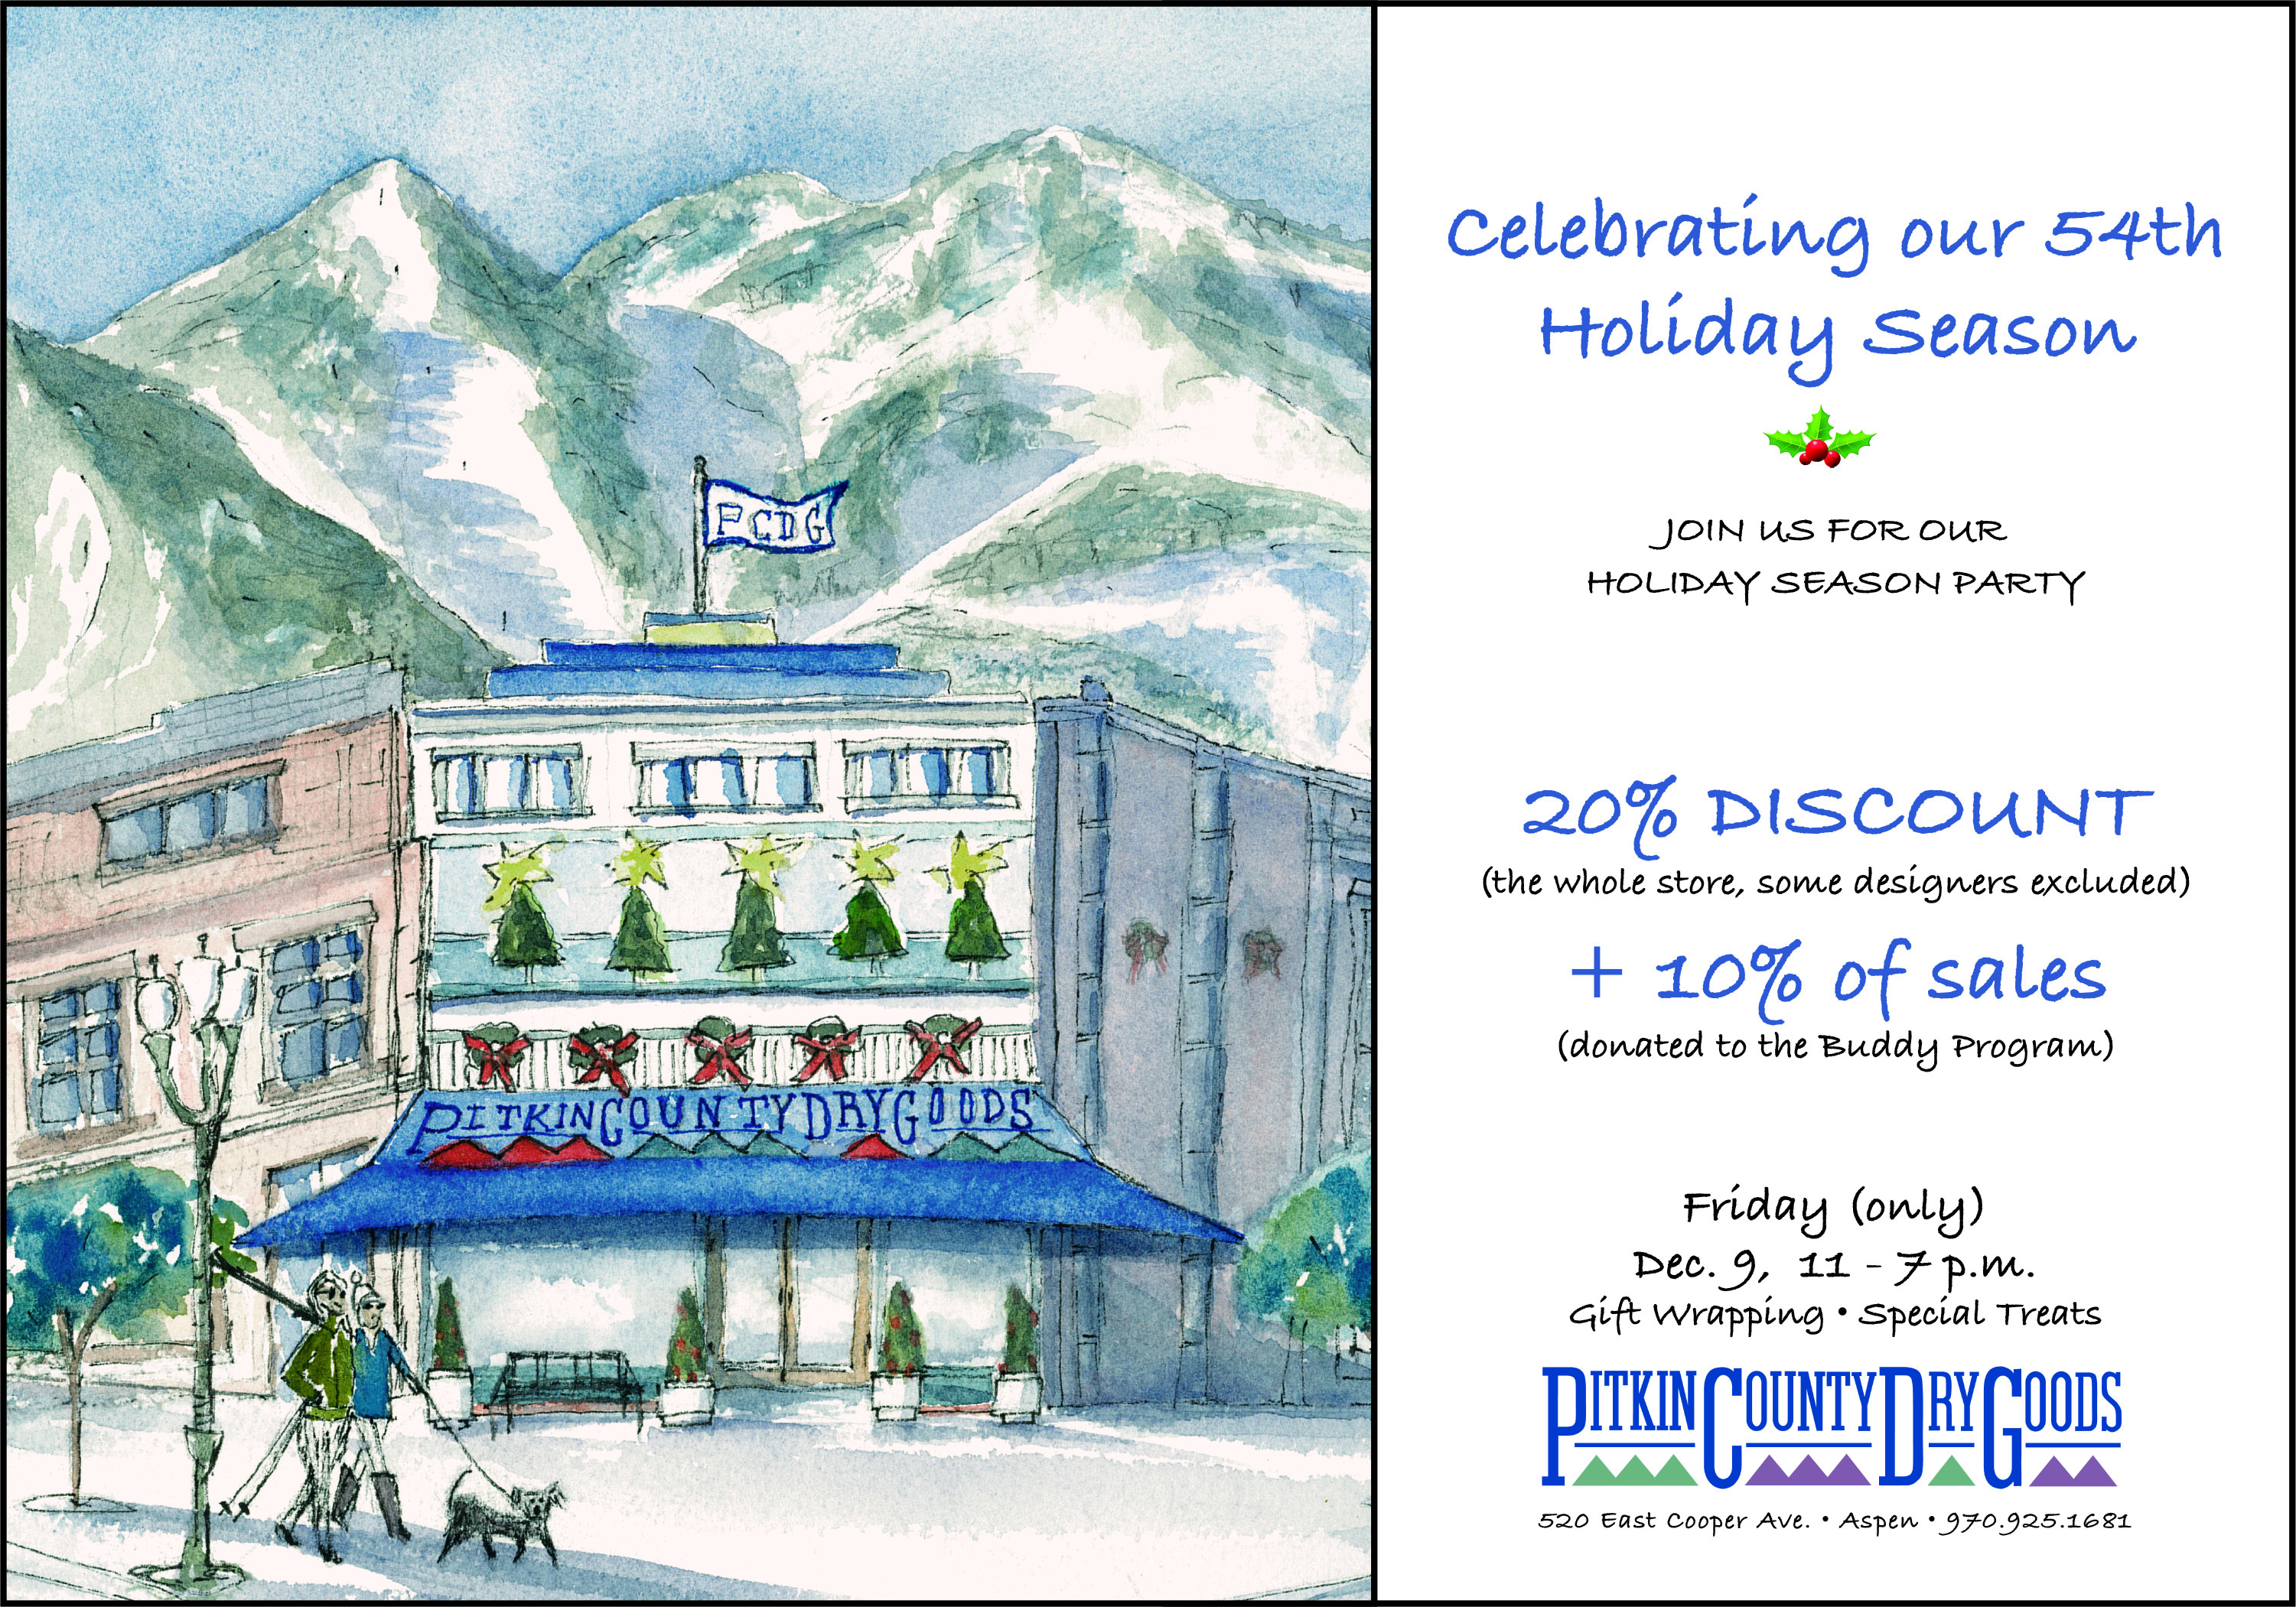 Pitkin County Dry Goods advertisement